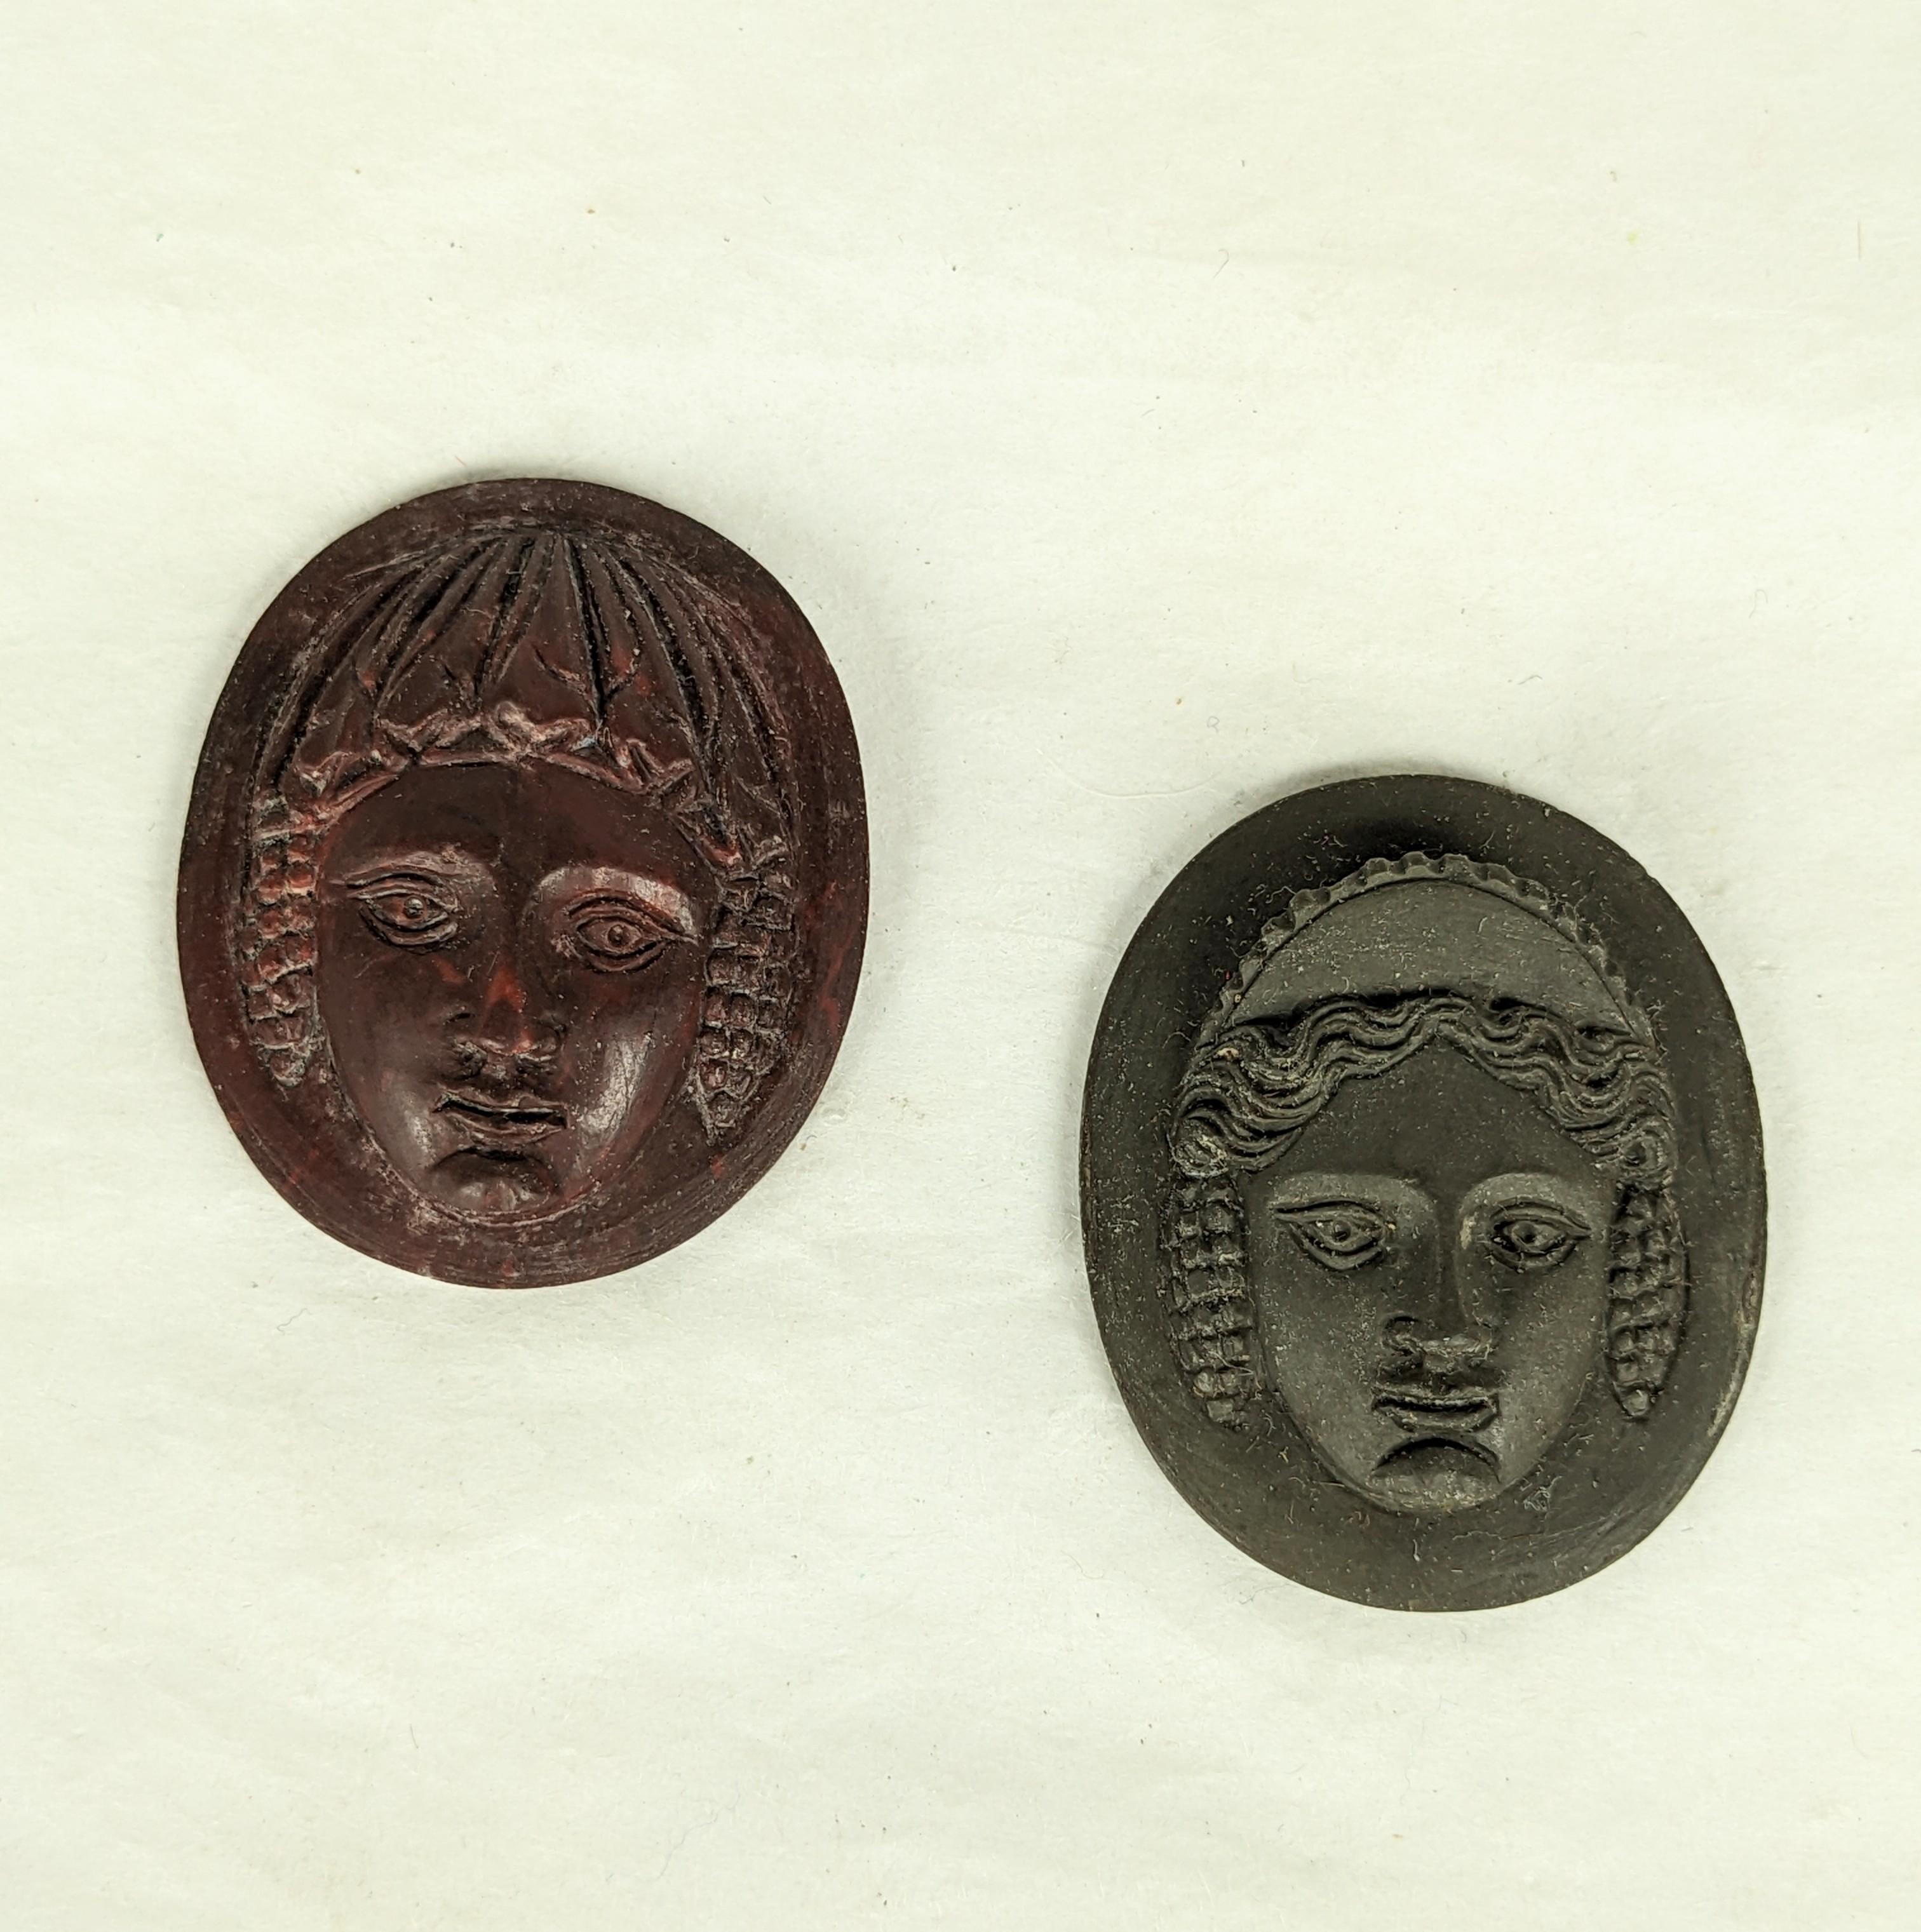 Pair of Hand Carved Neoclassical Lava Unmounted Cameos from the 19th Century, Italy. Almost identical in carving (different crowns), these would work beautifully set as a pair of earrings. One in deep brick lava, the other in deep grey green. 19th